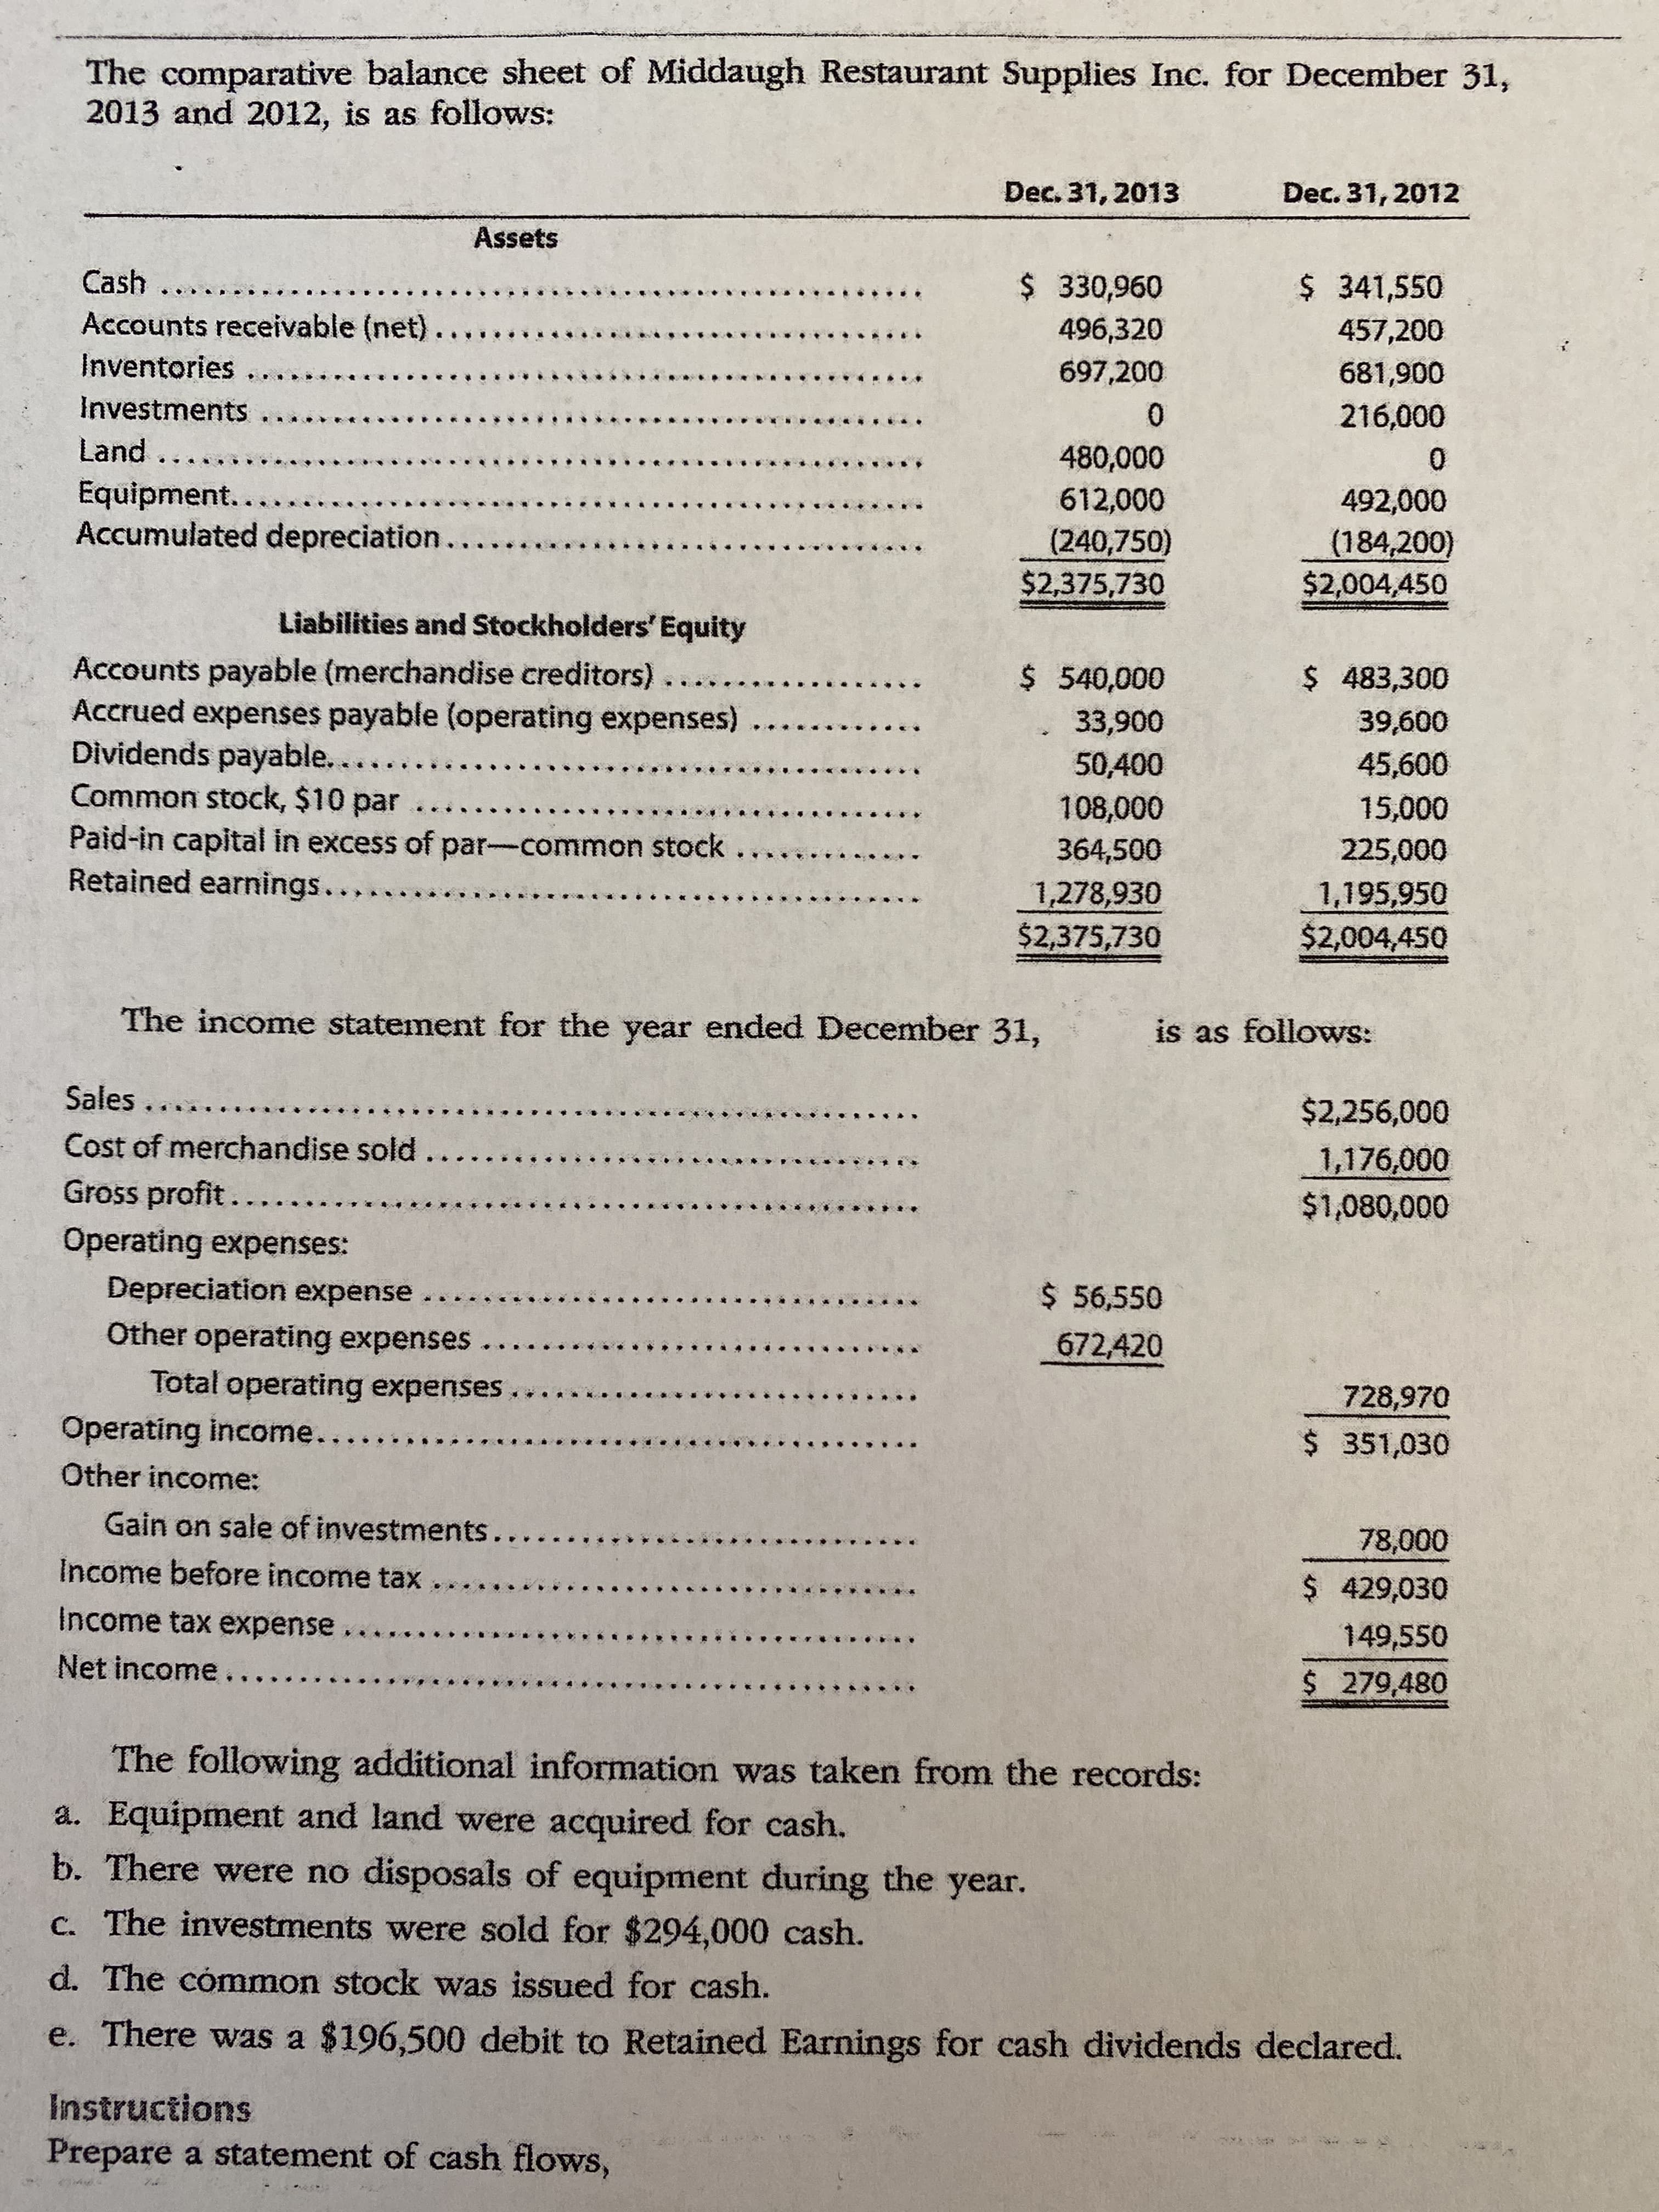 The comparative balance sheet of Middaugh Restaurant Supplies Inc. for December 31,
2013 and 2012, is as follows:
Dec. 31, 2013
Dec. 31, 2012
Assets
Cash ......
$ 330,960
$ 341,550
Accounts receivable (net)
496,320
457,200
Inventories ....
697,200
681,900
Investments
216,000
Land.....
480,000
Equipment...
Accumulated depreciation...
612,000
492,000
(240,750)
$2,375,730
(184,200)
$2,004,450
Liabilities and Stockholders' Equity
Accounts payable (merchandise creditors) ..
Accrued expenses payable (operating expenses)
Dividends payable....
Common stock, $10 par
$ 540,000
$ 483,300
33,900
39,600
50,400
45,600
15,000
Paid-in capital in excess of par-common stock.
Retained earnings...
108,000
364,500
225,000
1,278,930
$2,375,730
1,195,950
$2,004,450
The income statement for the year ended December 31,
is as follows:
Sales ....
$2,256,000
Cost of merchandise sold
Gross profit ...
1,176,000
$1,080,000
Operating expenses:
Depreciation expense
$ 56,550
Other operating expenses
672,420
Total operating expenses.
728,970
Operating income..
$ 351,030
Other income:
Gain on sale of investments...
78,000
Income before income tax ,..
$ 429,030
Income tax expense ..
Net income..
149,550
$ 279,480
The following additional information was taken from the records:
a. Equipment and land were acquired for cash.
b. There were no disposals of equipment during the year.
c. The investments were sold for $294,000 cash.
d. The cómmon stock was issued for cash.
e. There was a $196,500 debit to Retained Earnings for cash dividends declared.
Instructions
Prepare a statement of cash flows,
